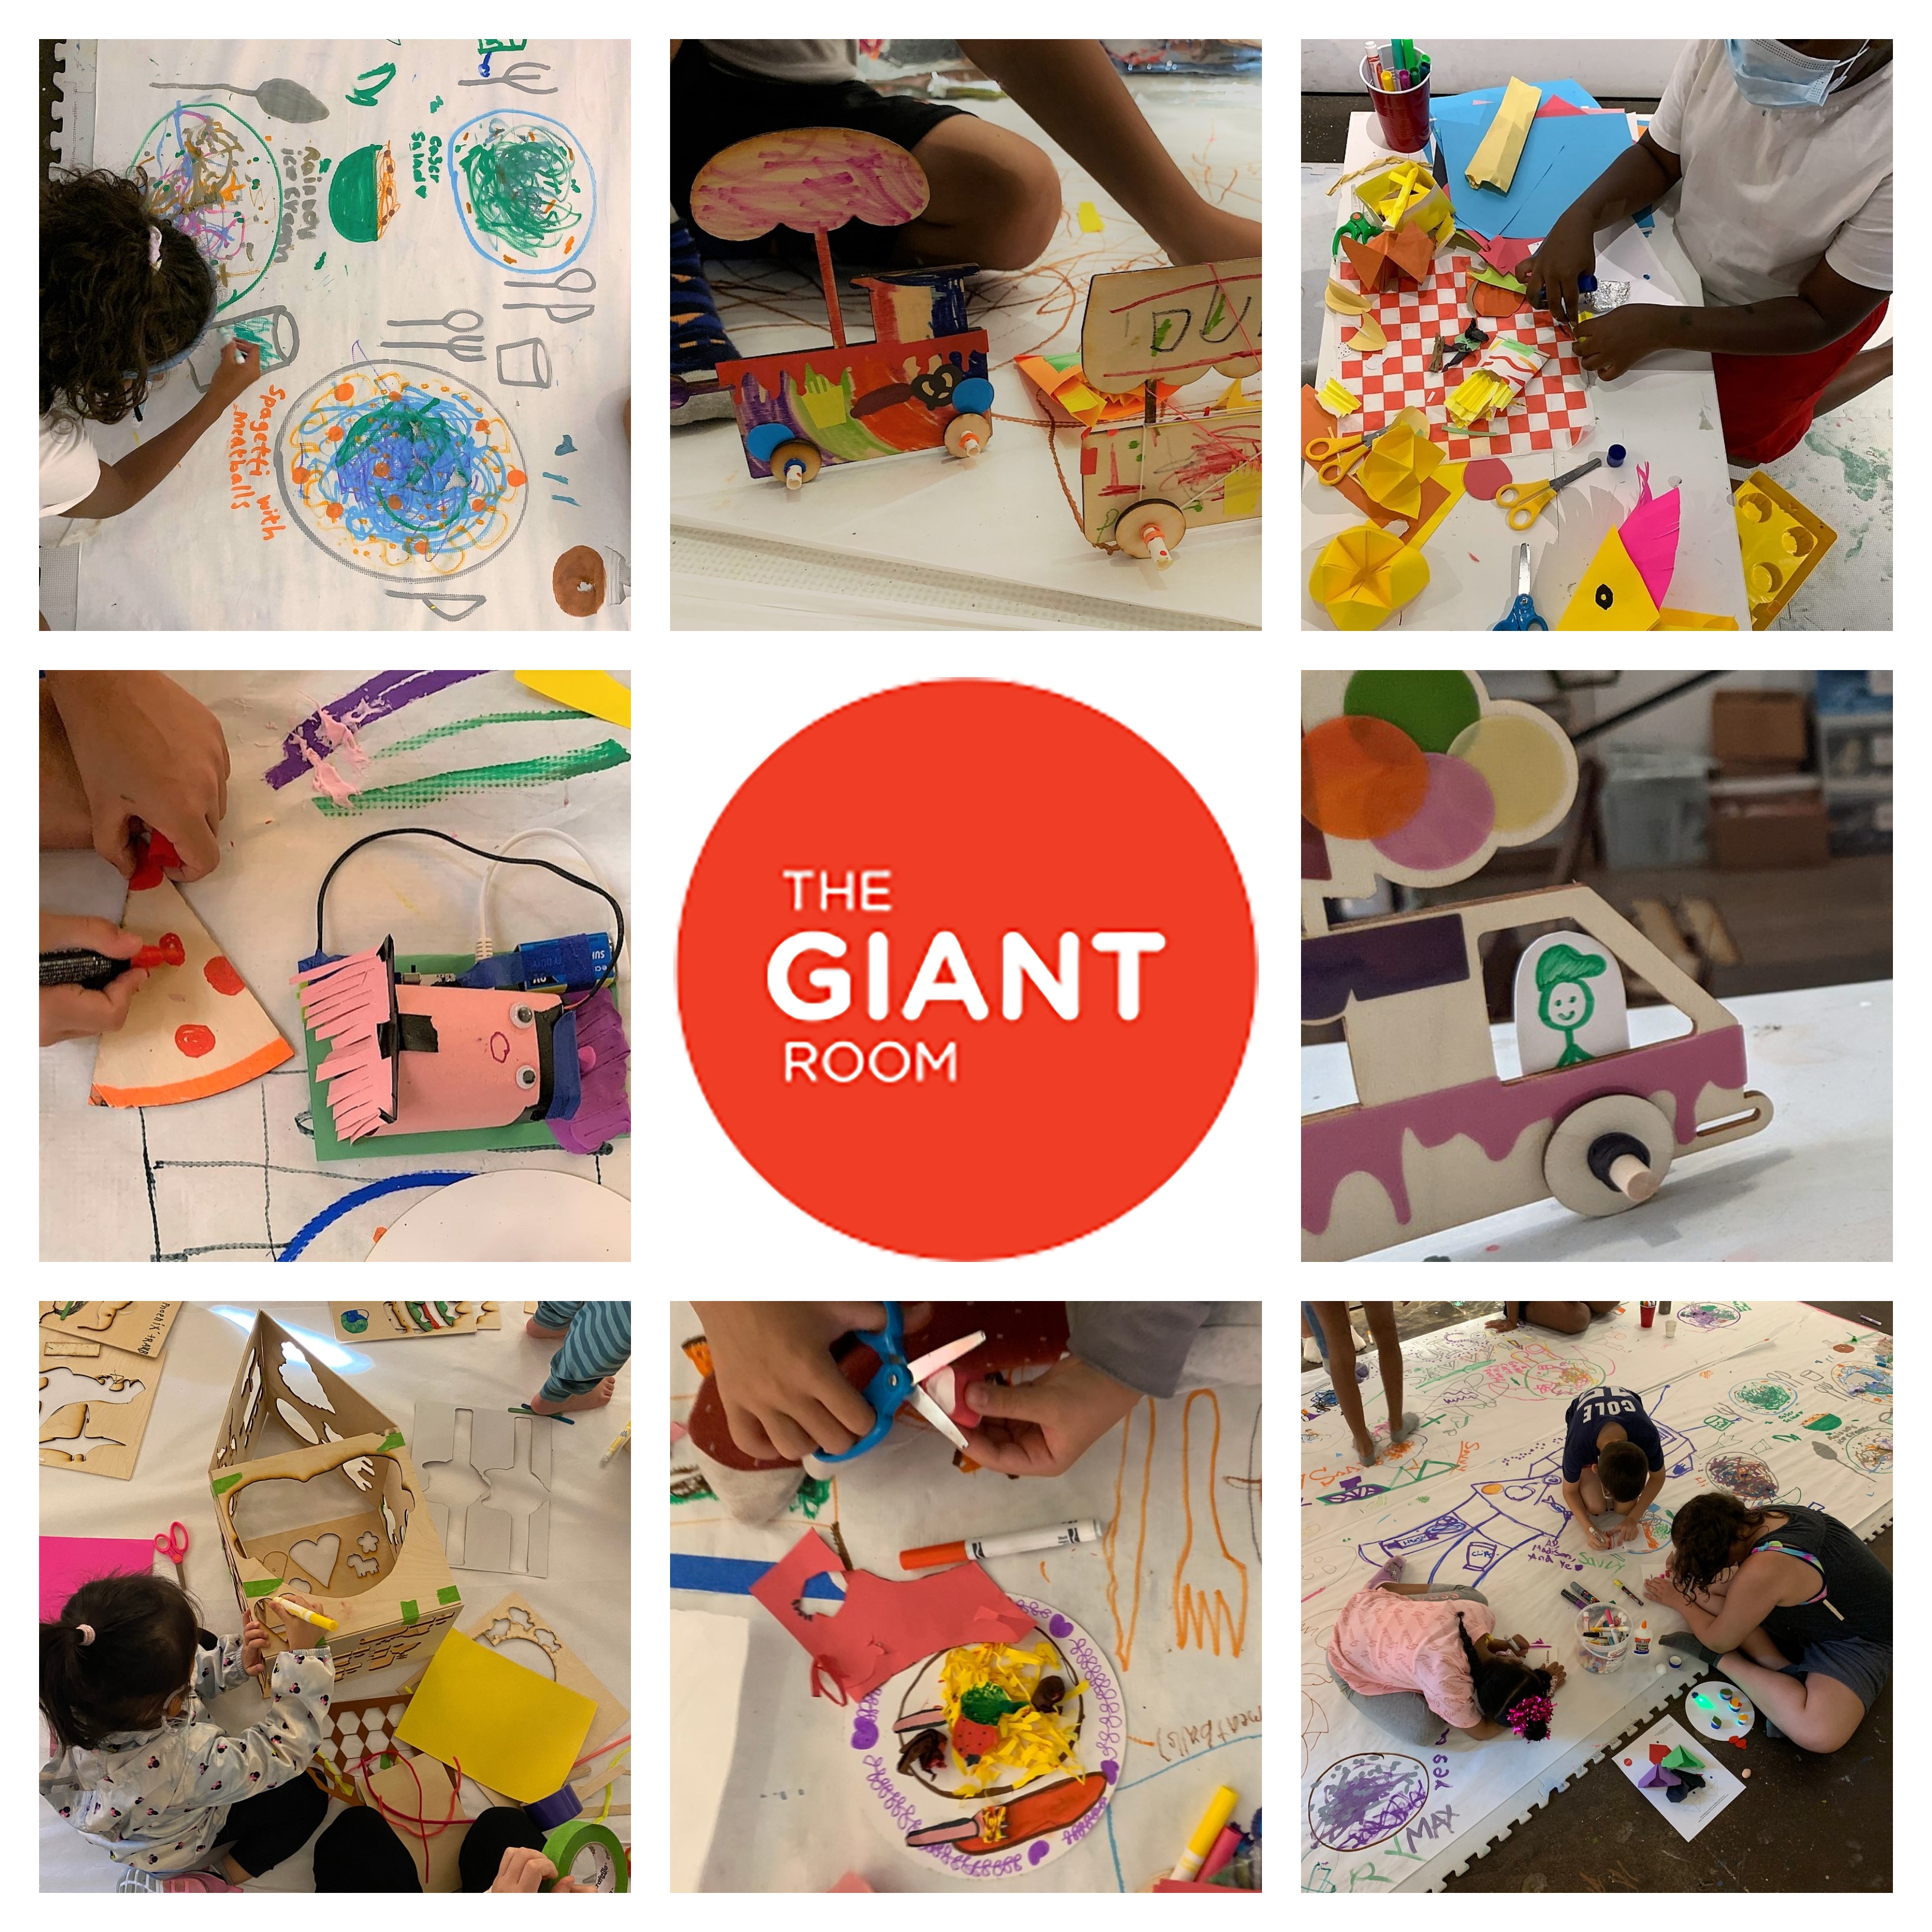 Children drawn and make crafts in eight photos surrounding a red circle logo that reads, The Giant Room.